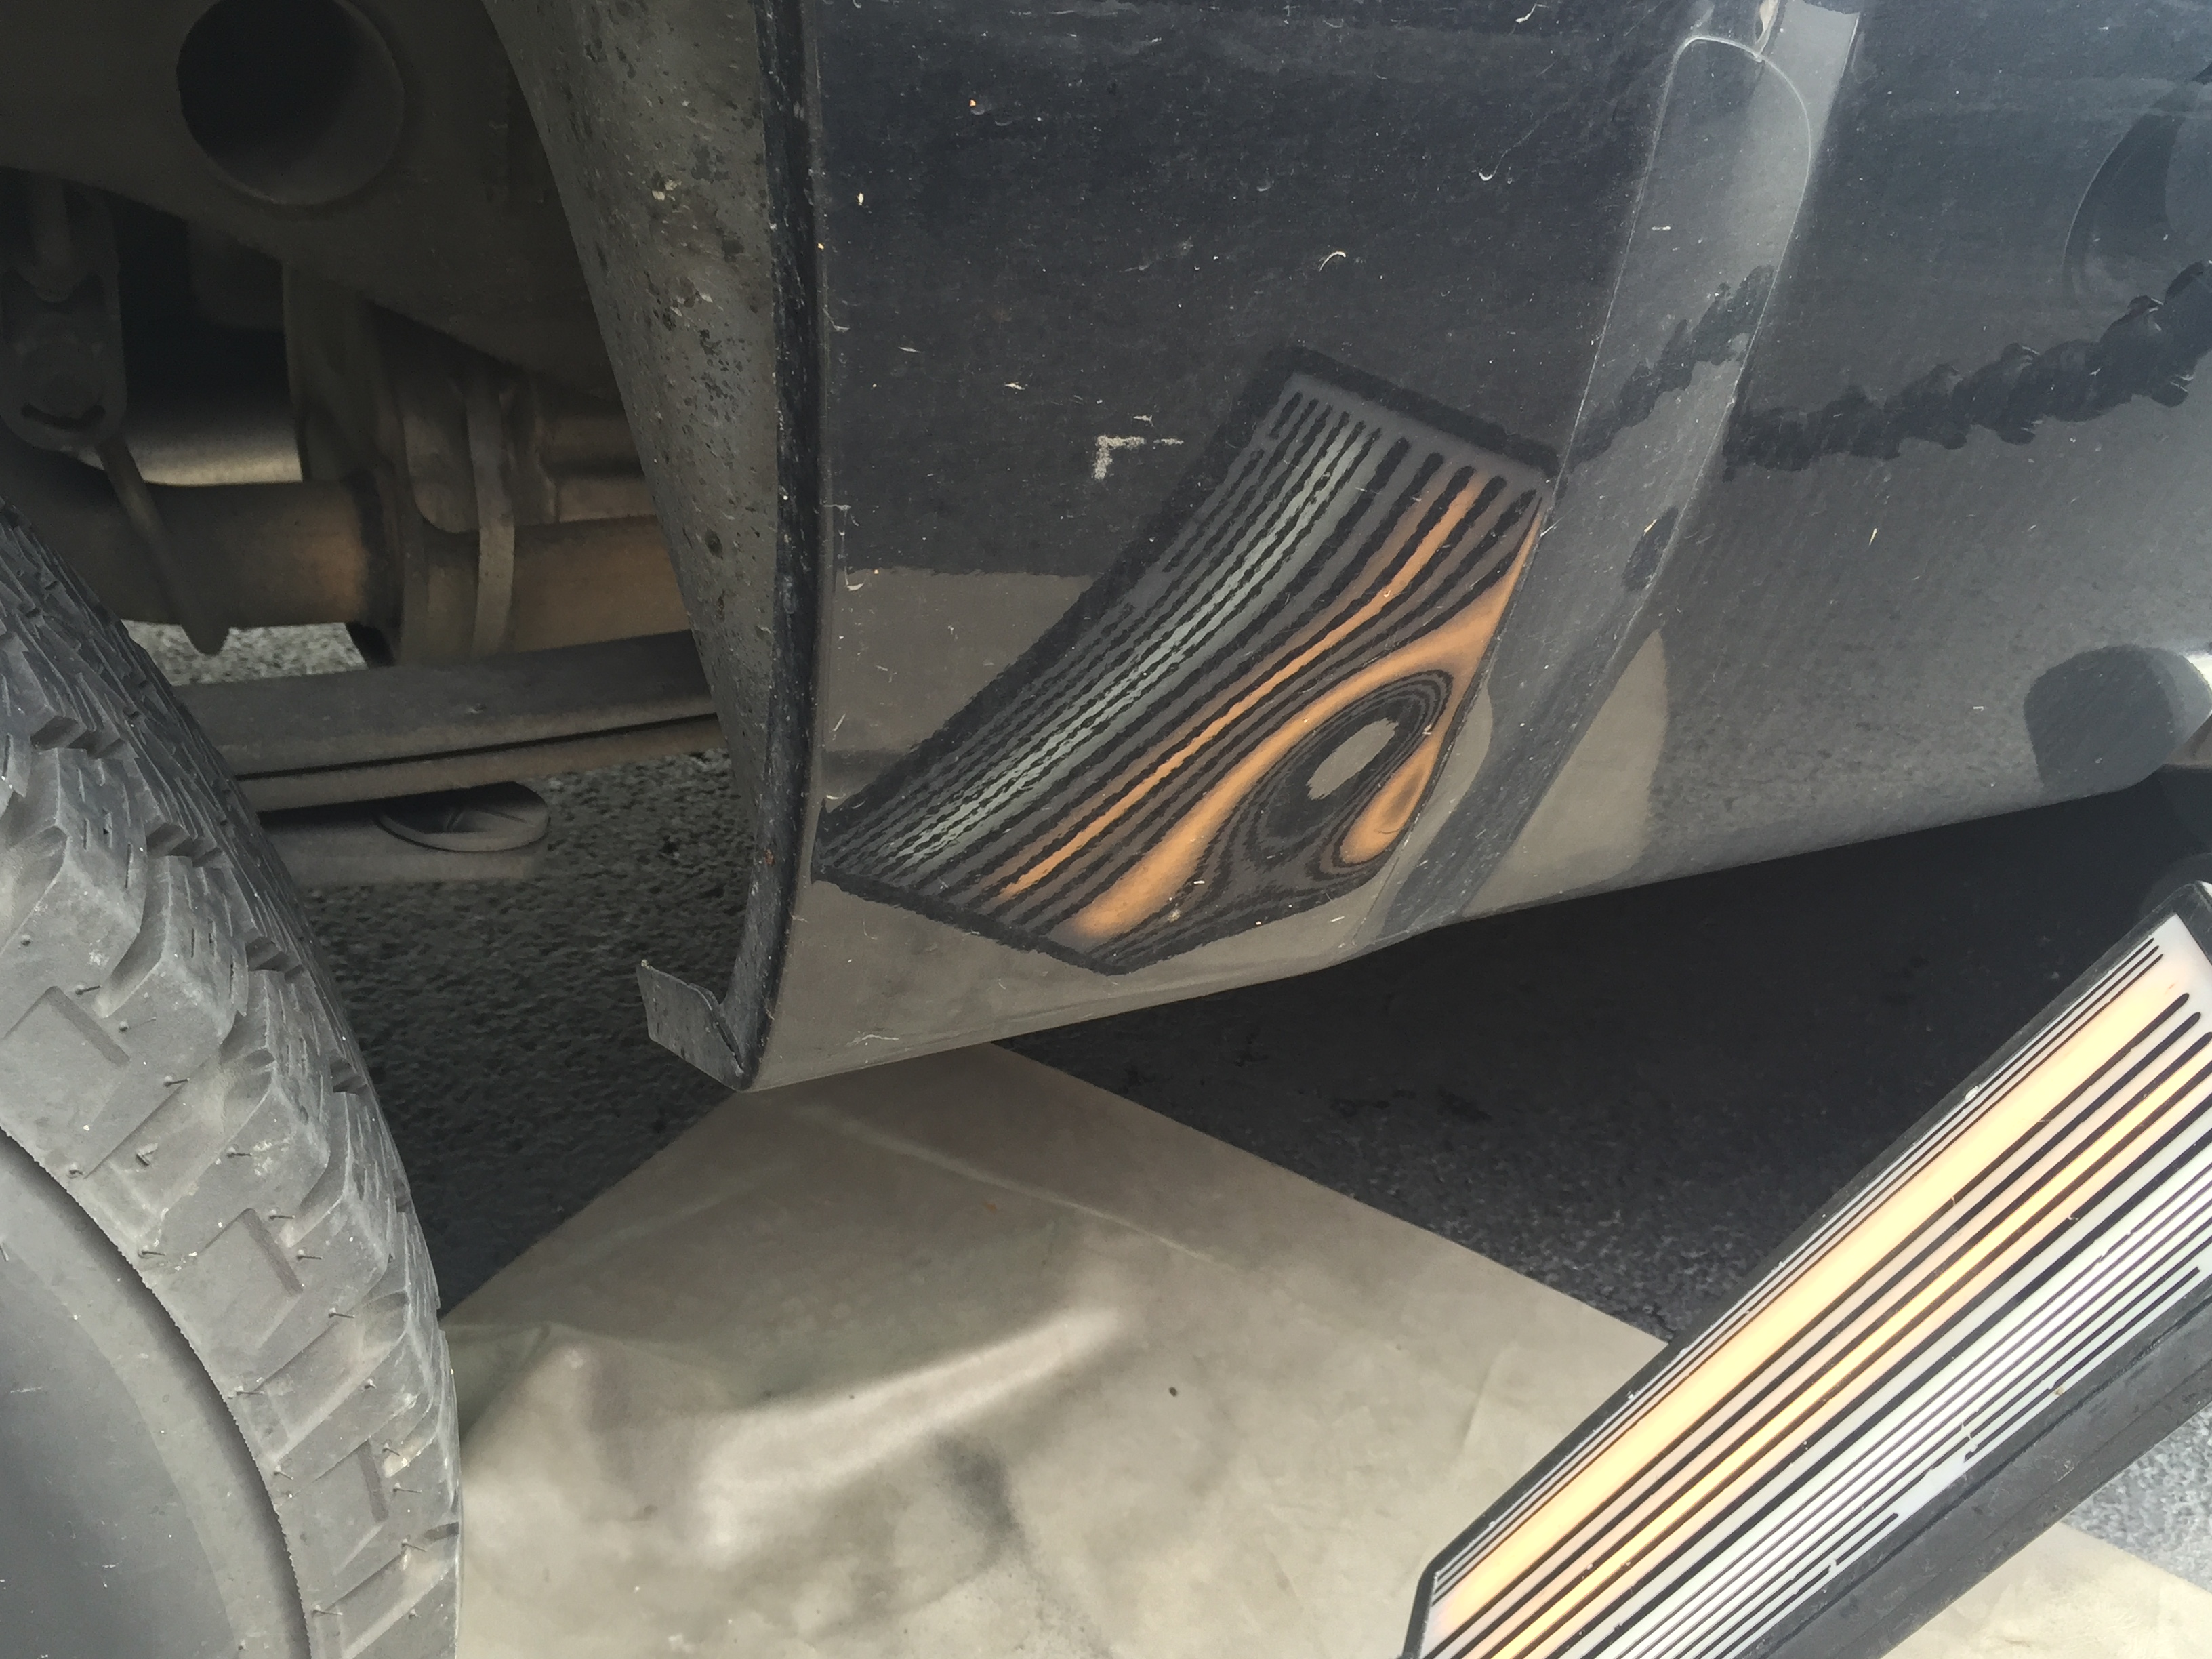 2011 Chevy Silverado Dent Repair, Michael Bocek out of Springfield, IL with http://217dent.com 217 dent